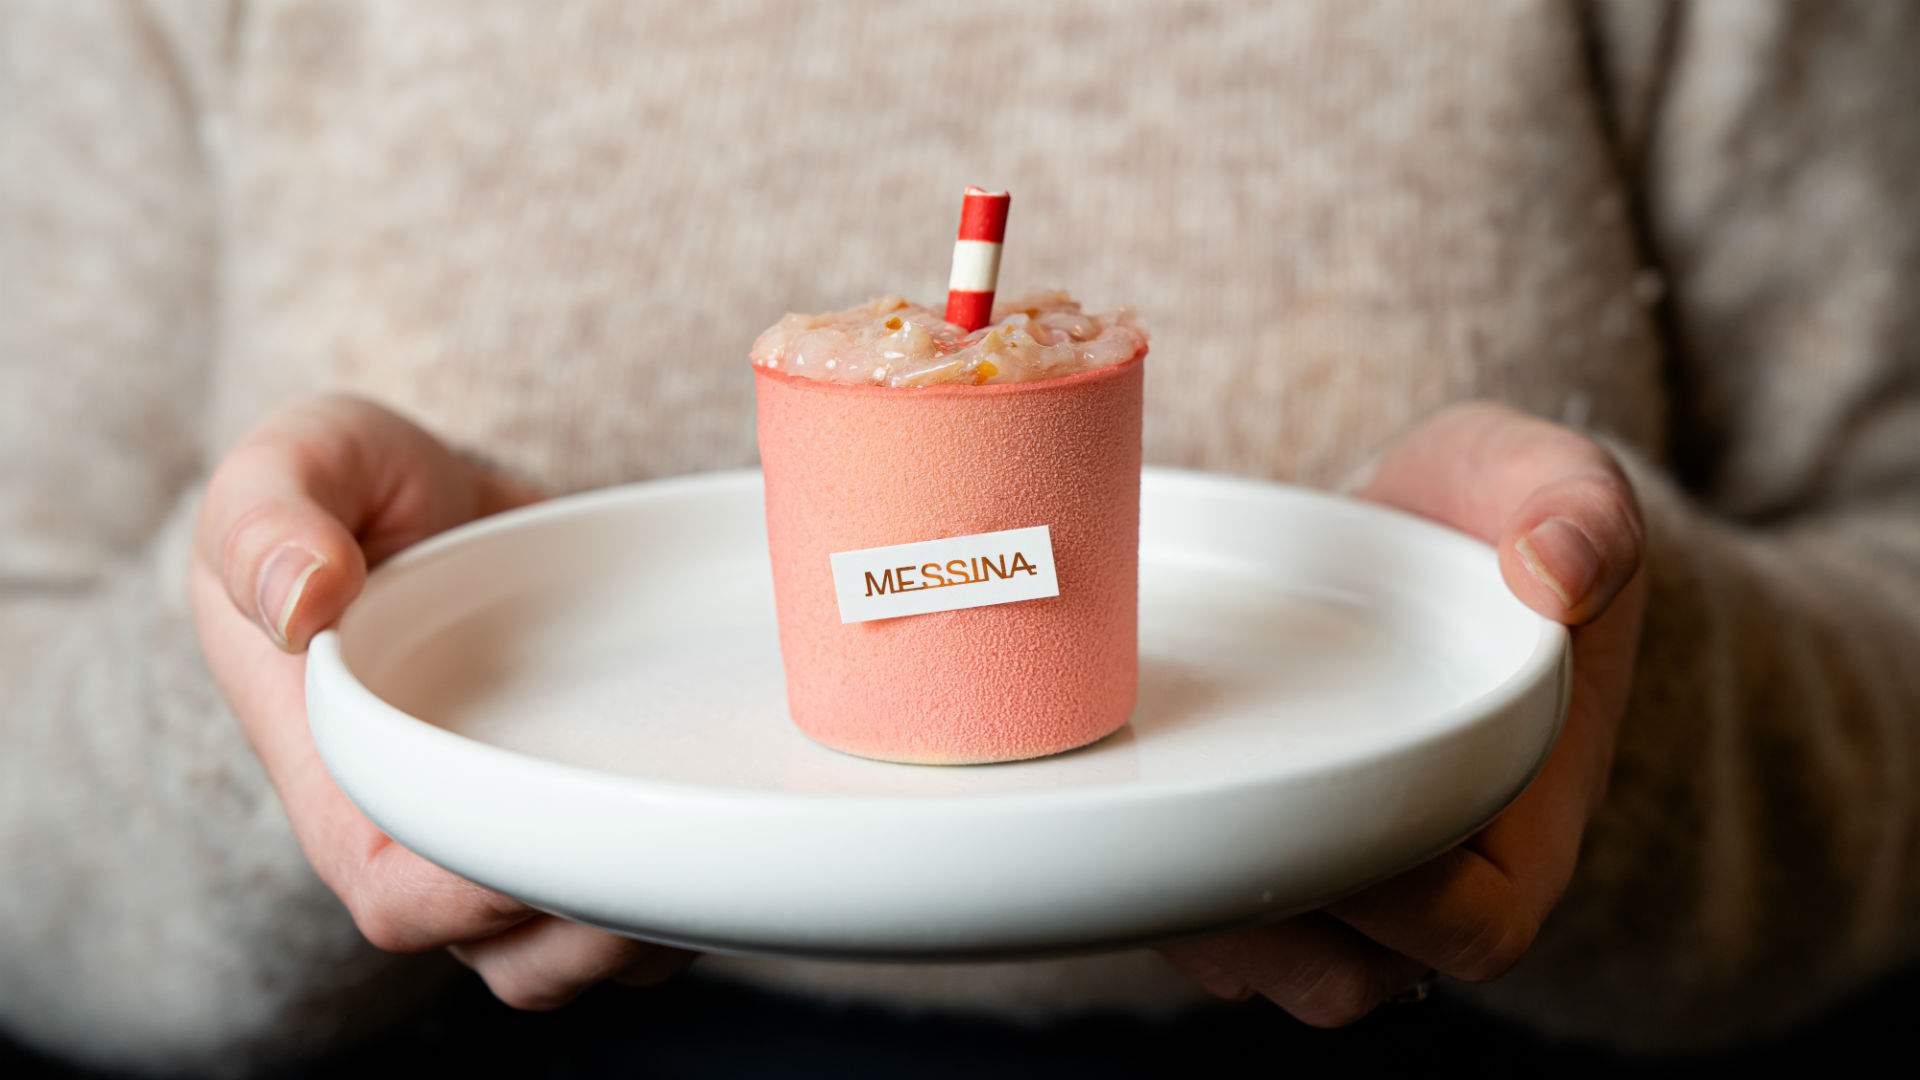 Messina Has Released a New Line of Mini Gelato Cakes Perfect for When You Don't Want to Share